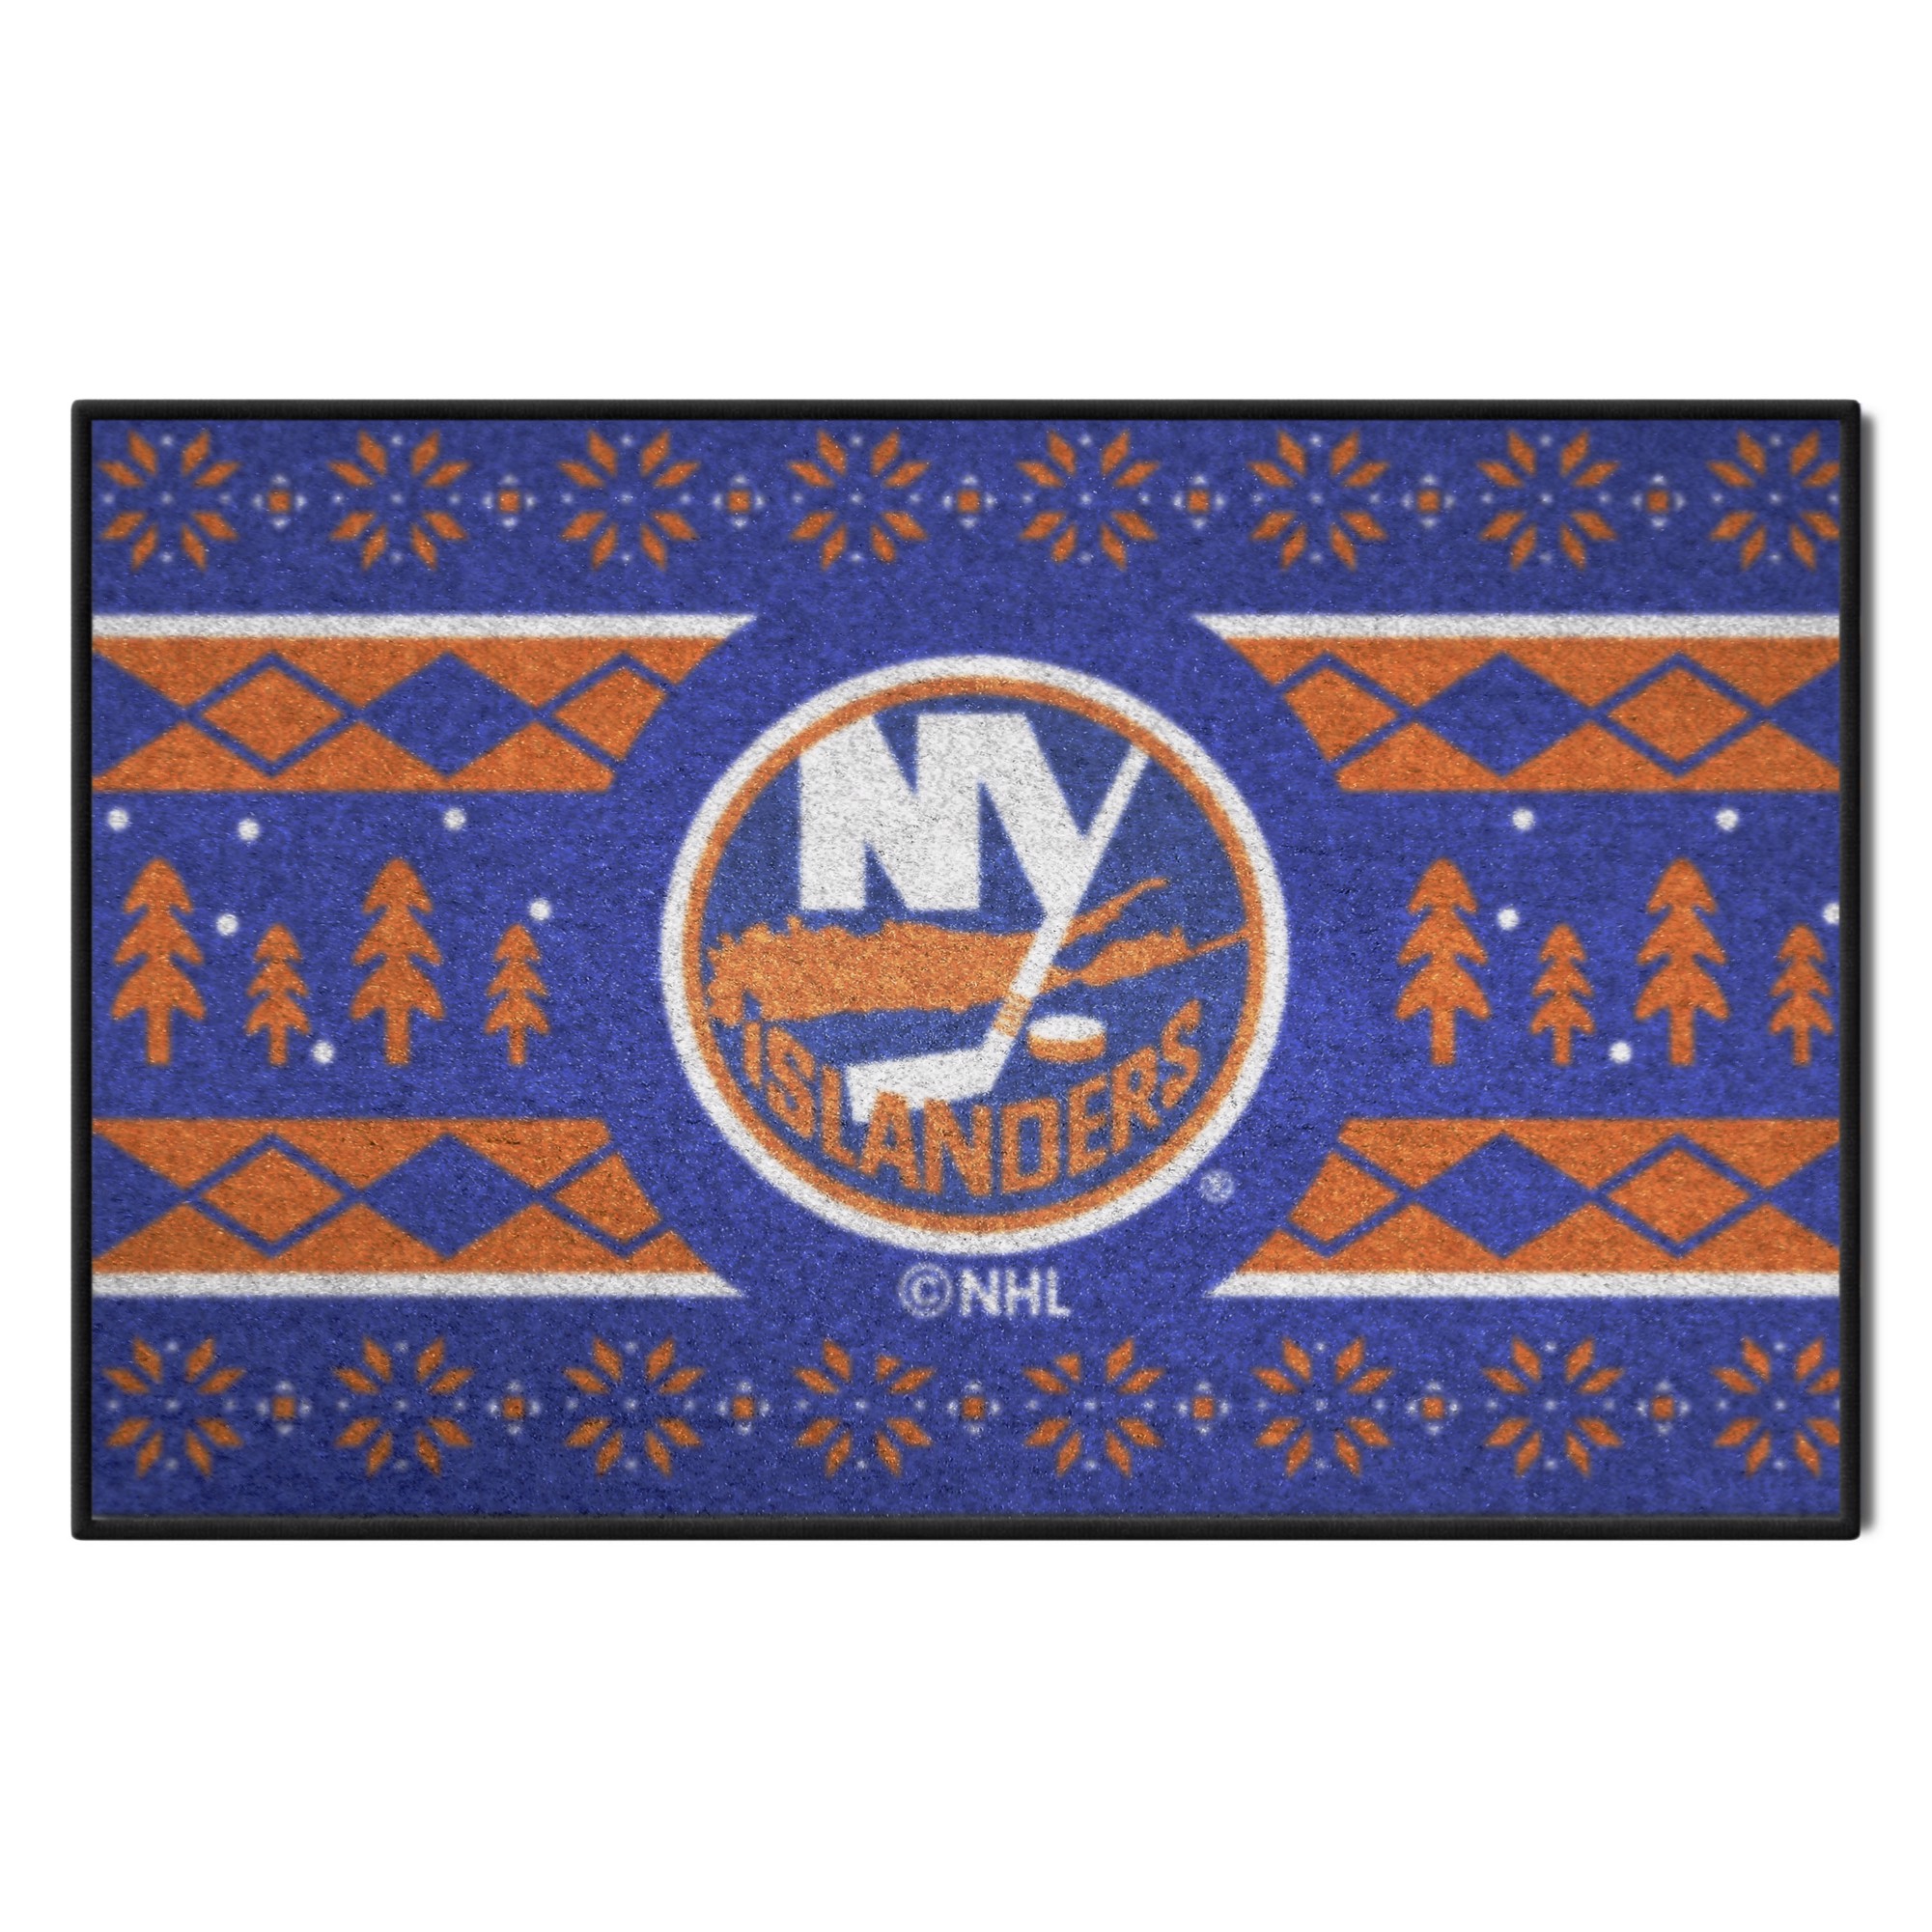 Officially Licensed NHL Holiday Sweater Rug 19x30 - New Jersey Devils